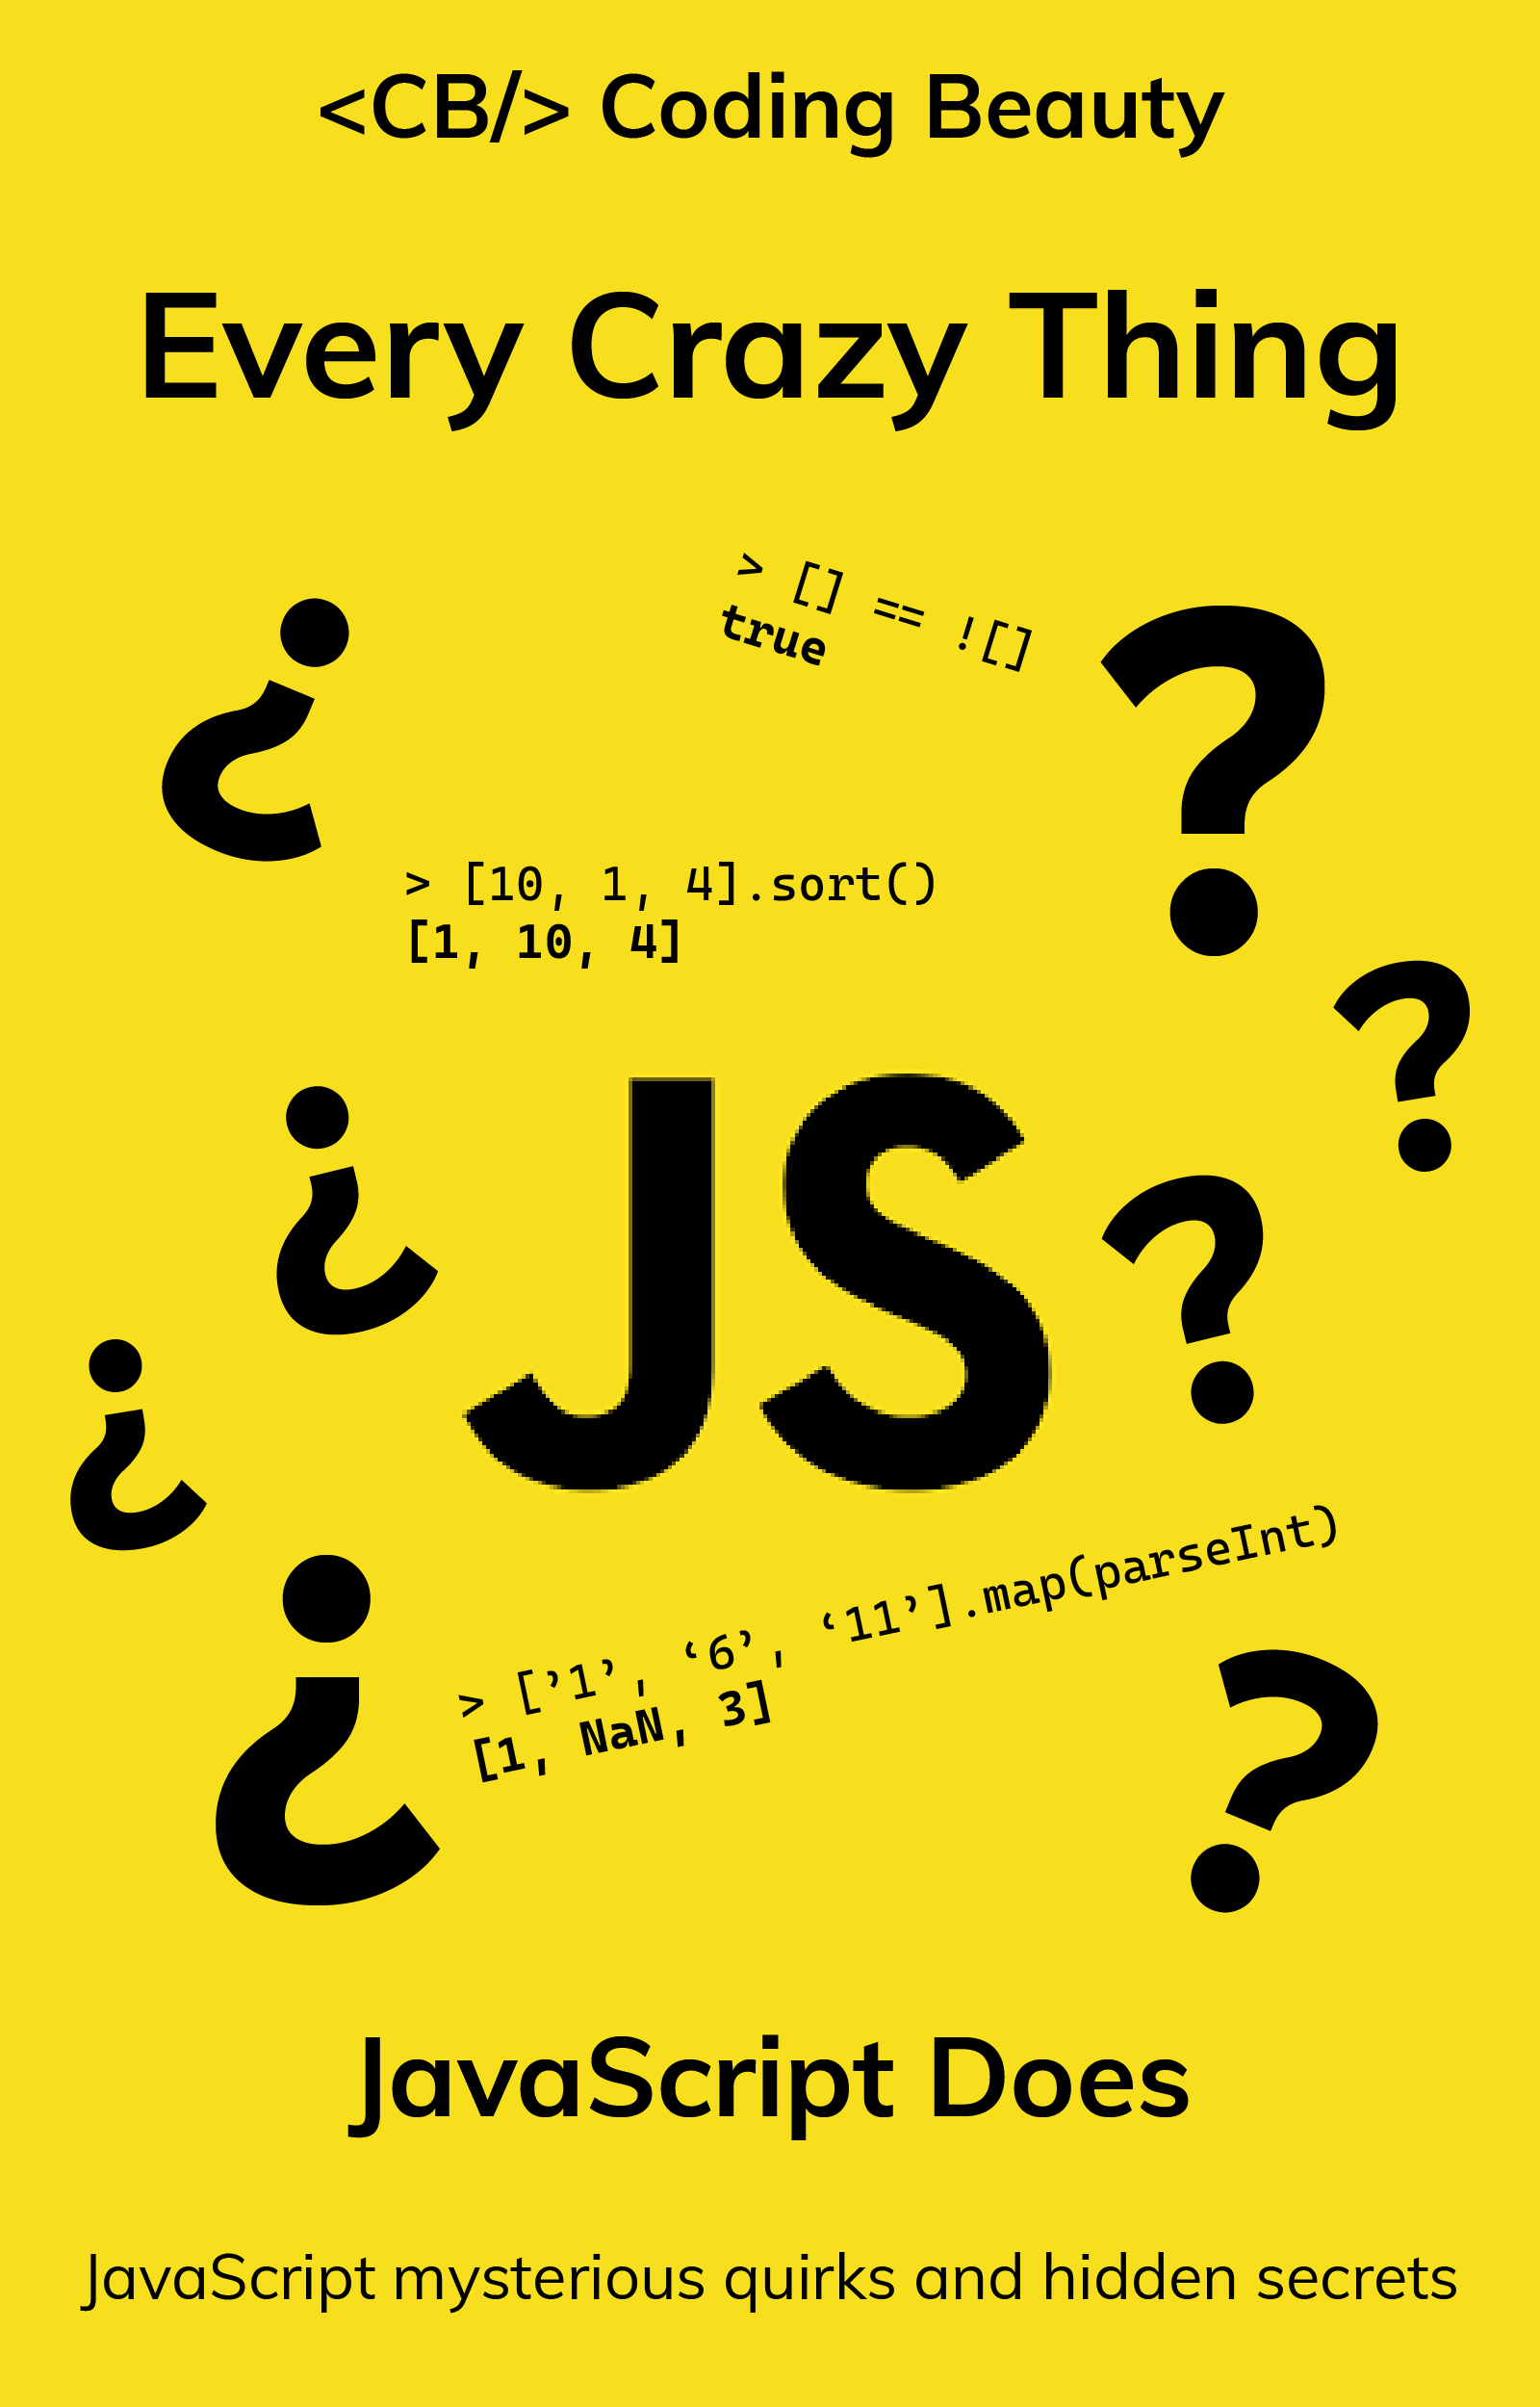 Every Crazy Thing JavaScript Does